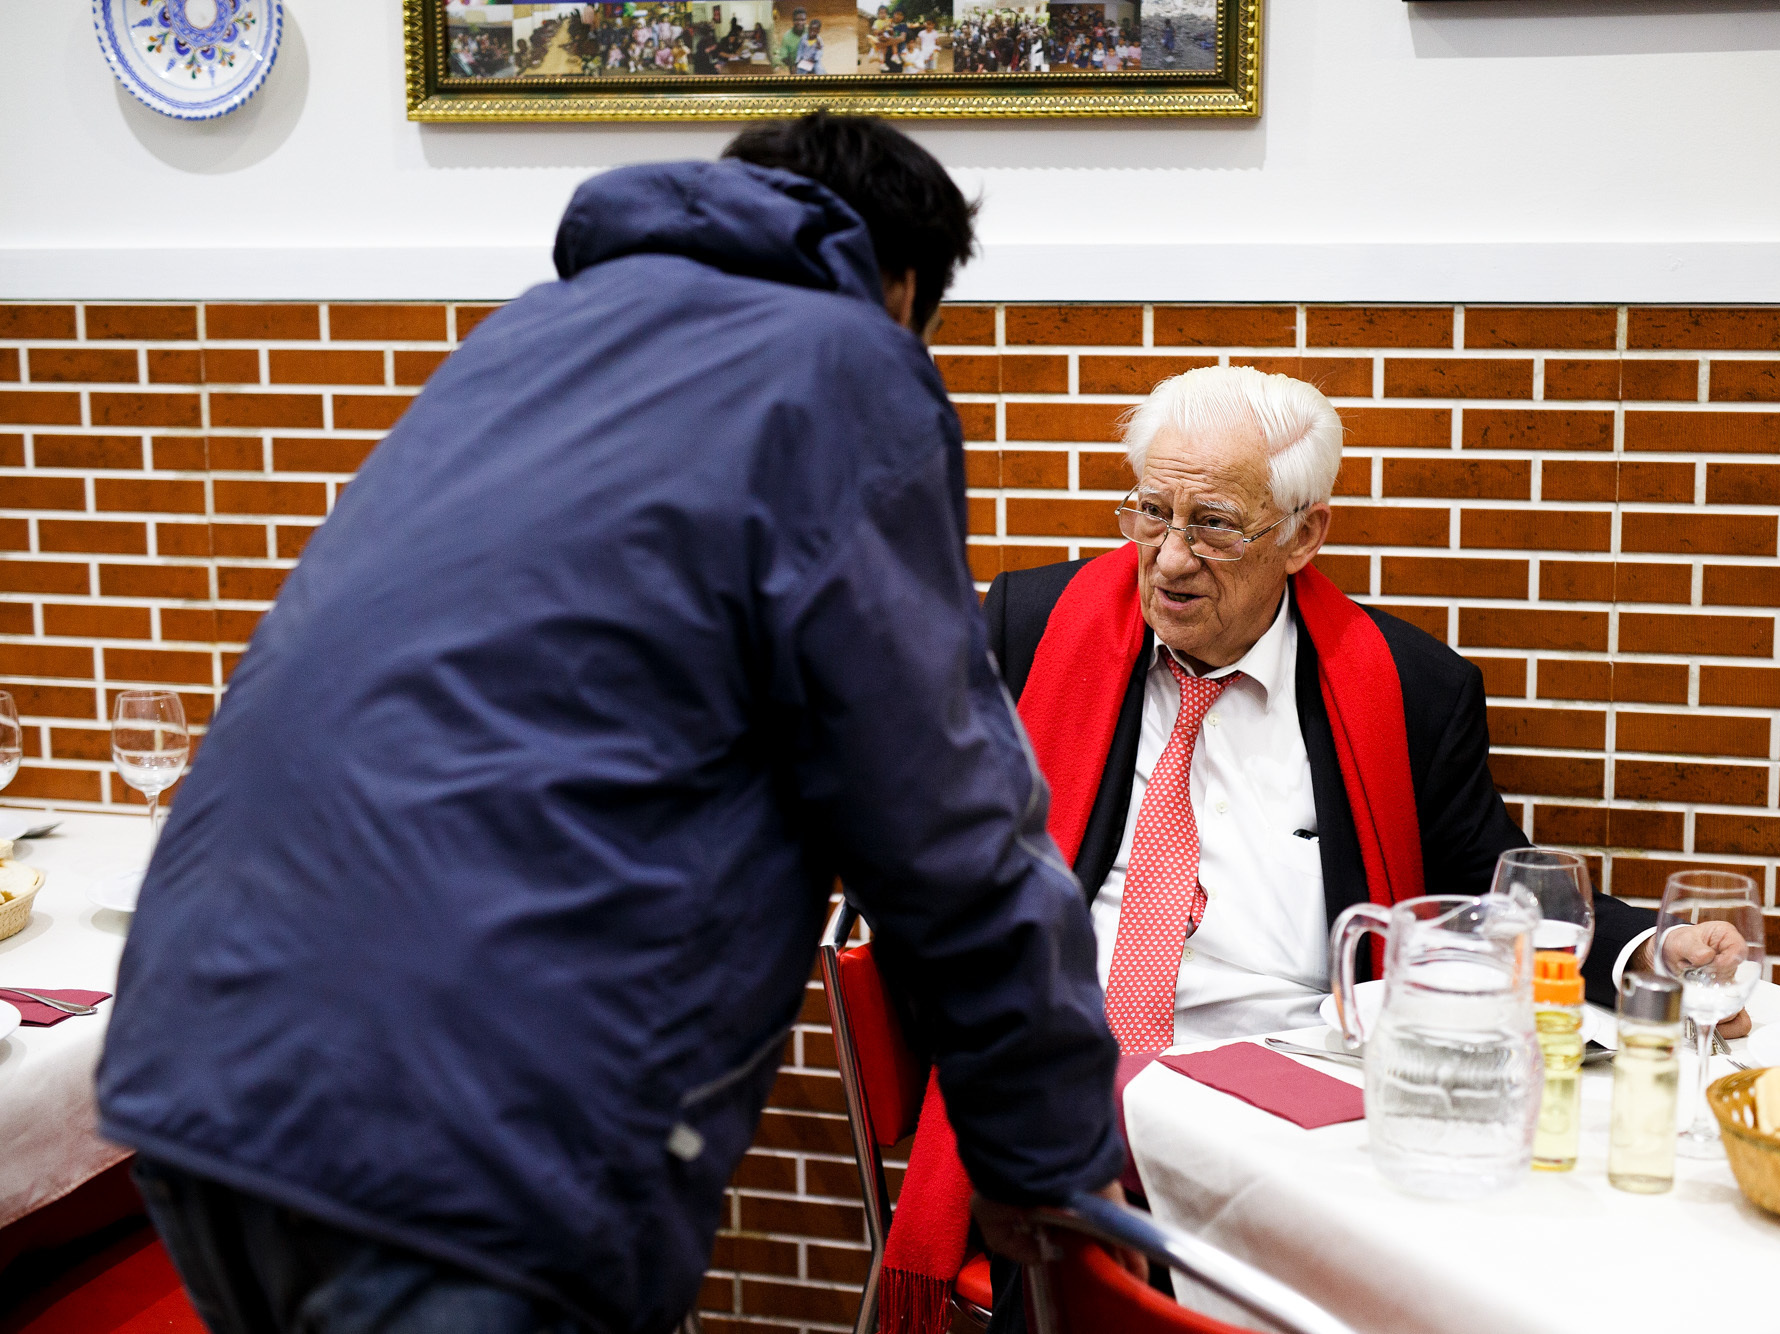 A dinner patron chats with Father Angel (right), who says that he wants homeless people to "eat with the same dignity as any other customer."